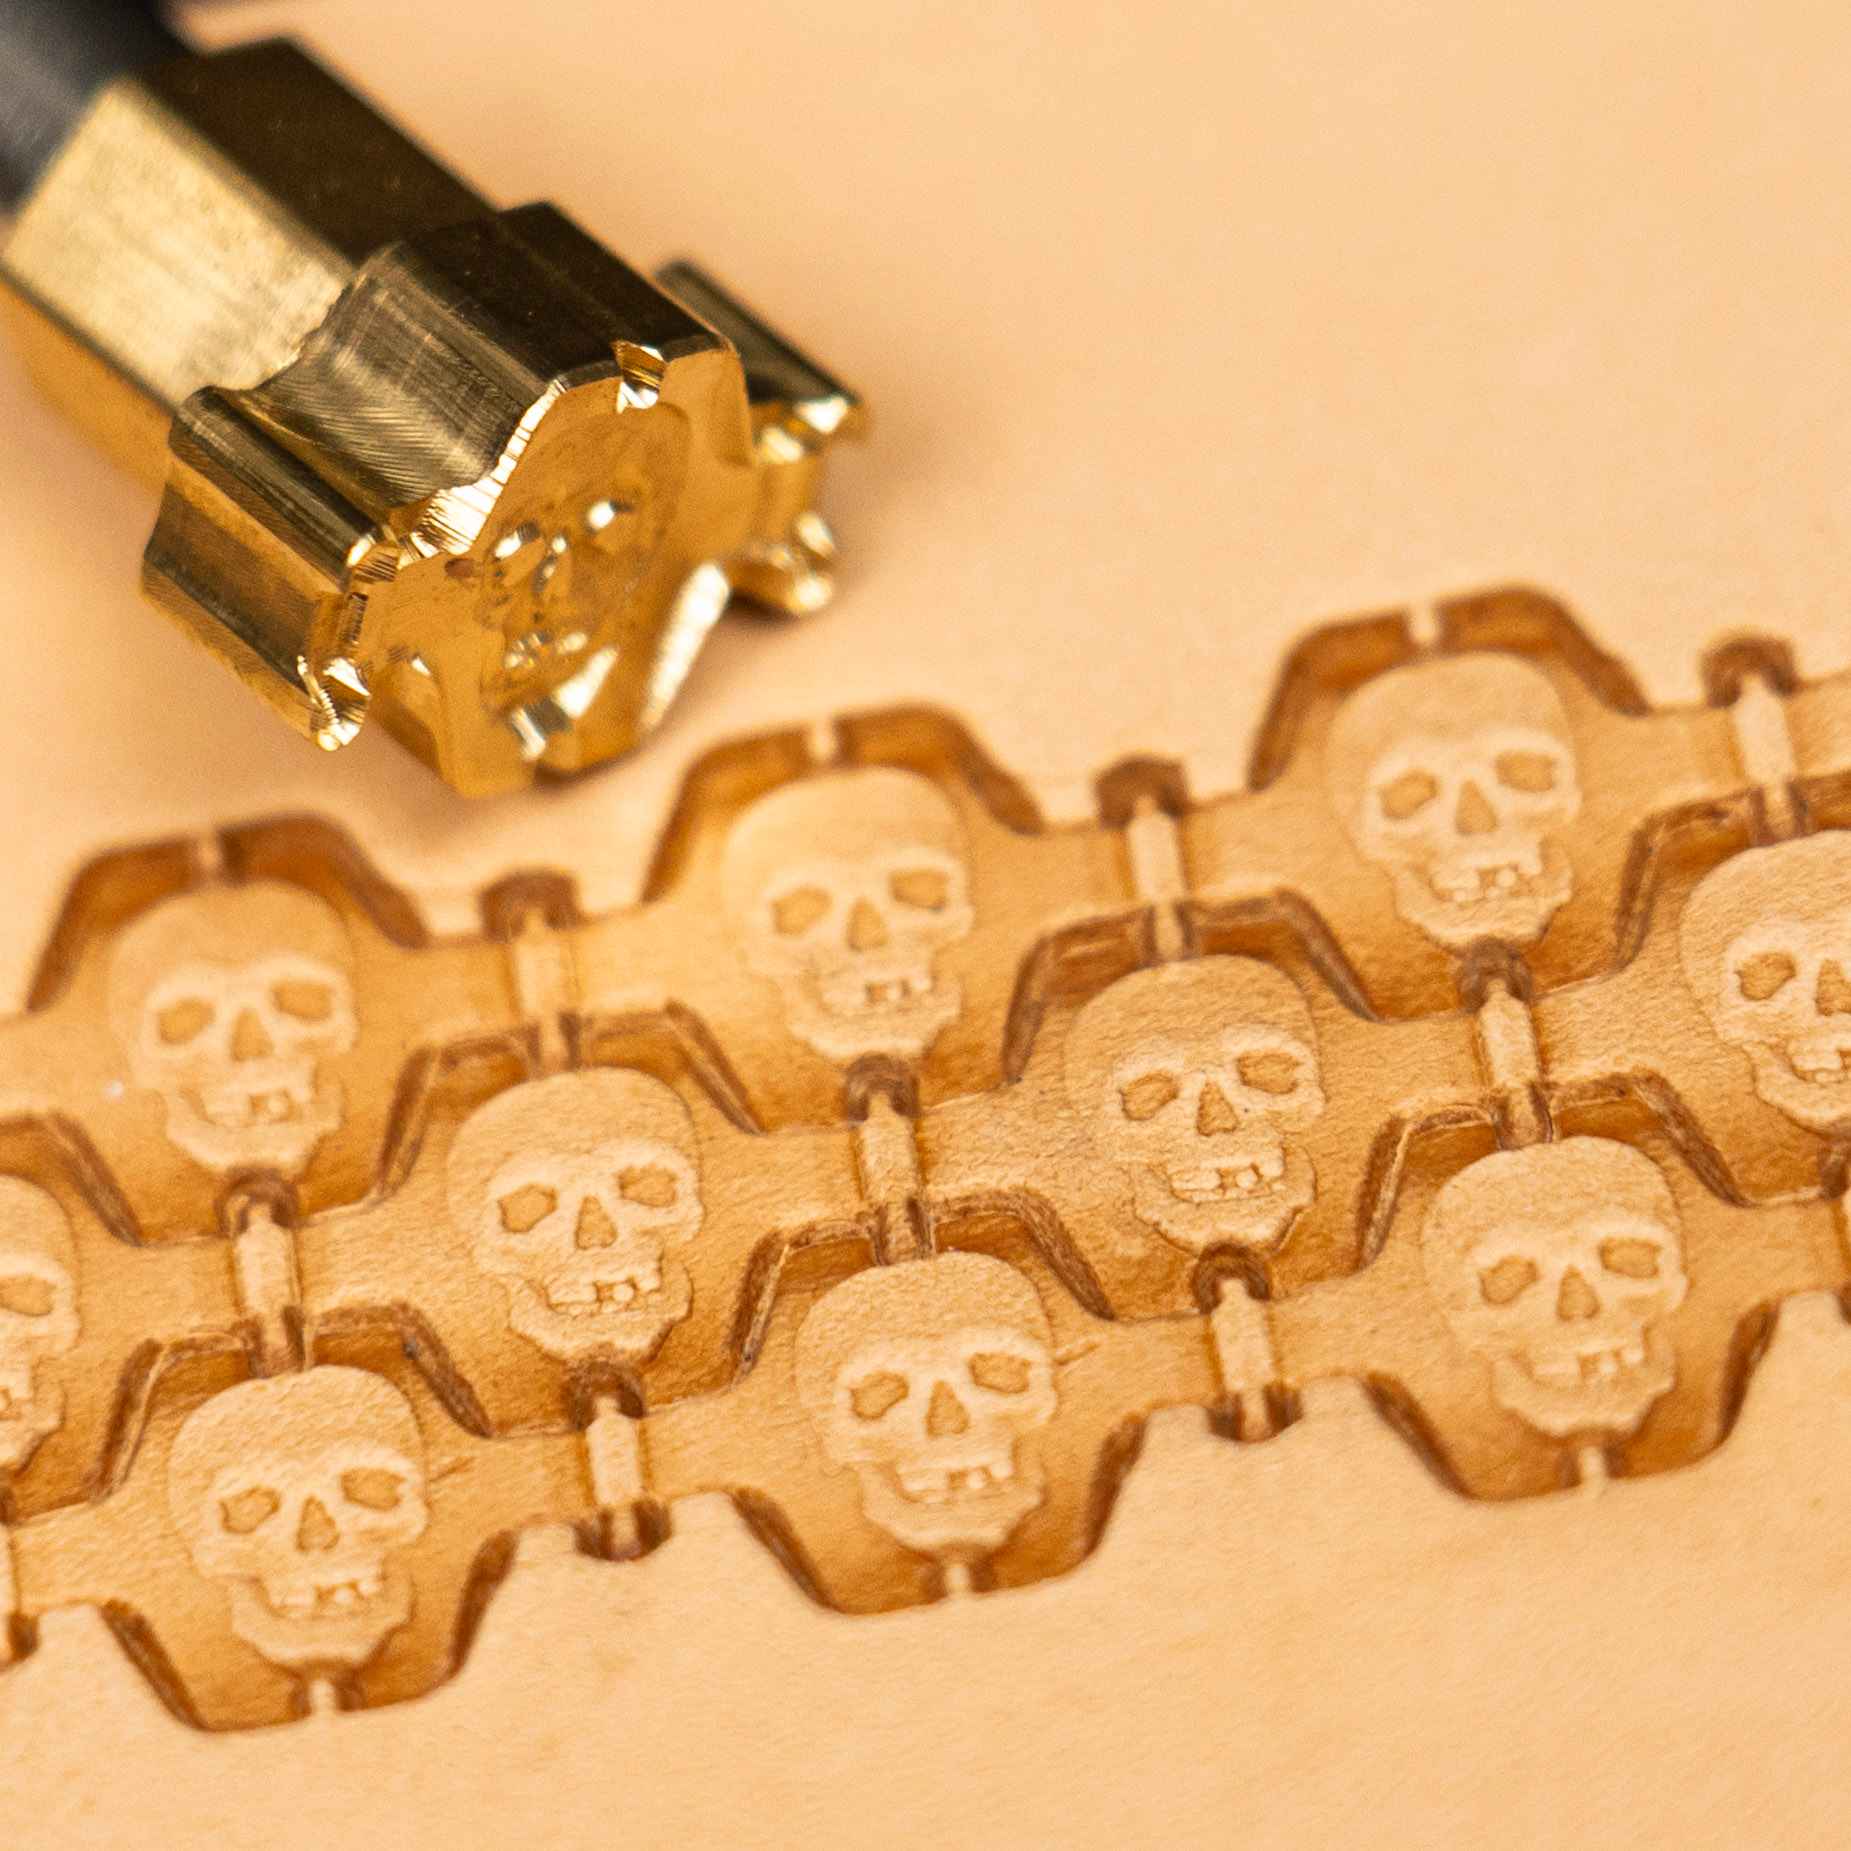 Skull Leather Stamps - Unique Stamping Tools for Bold Designs